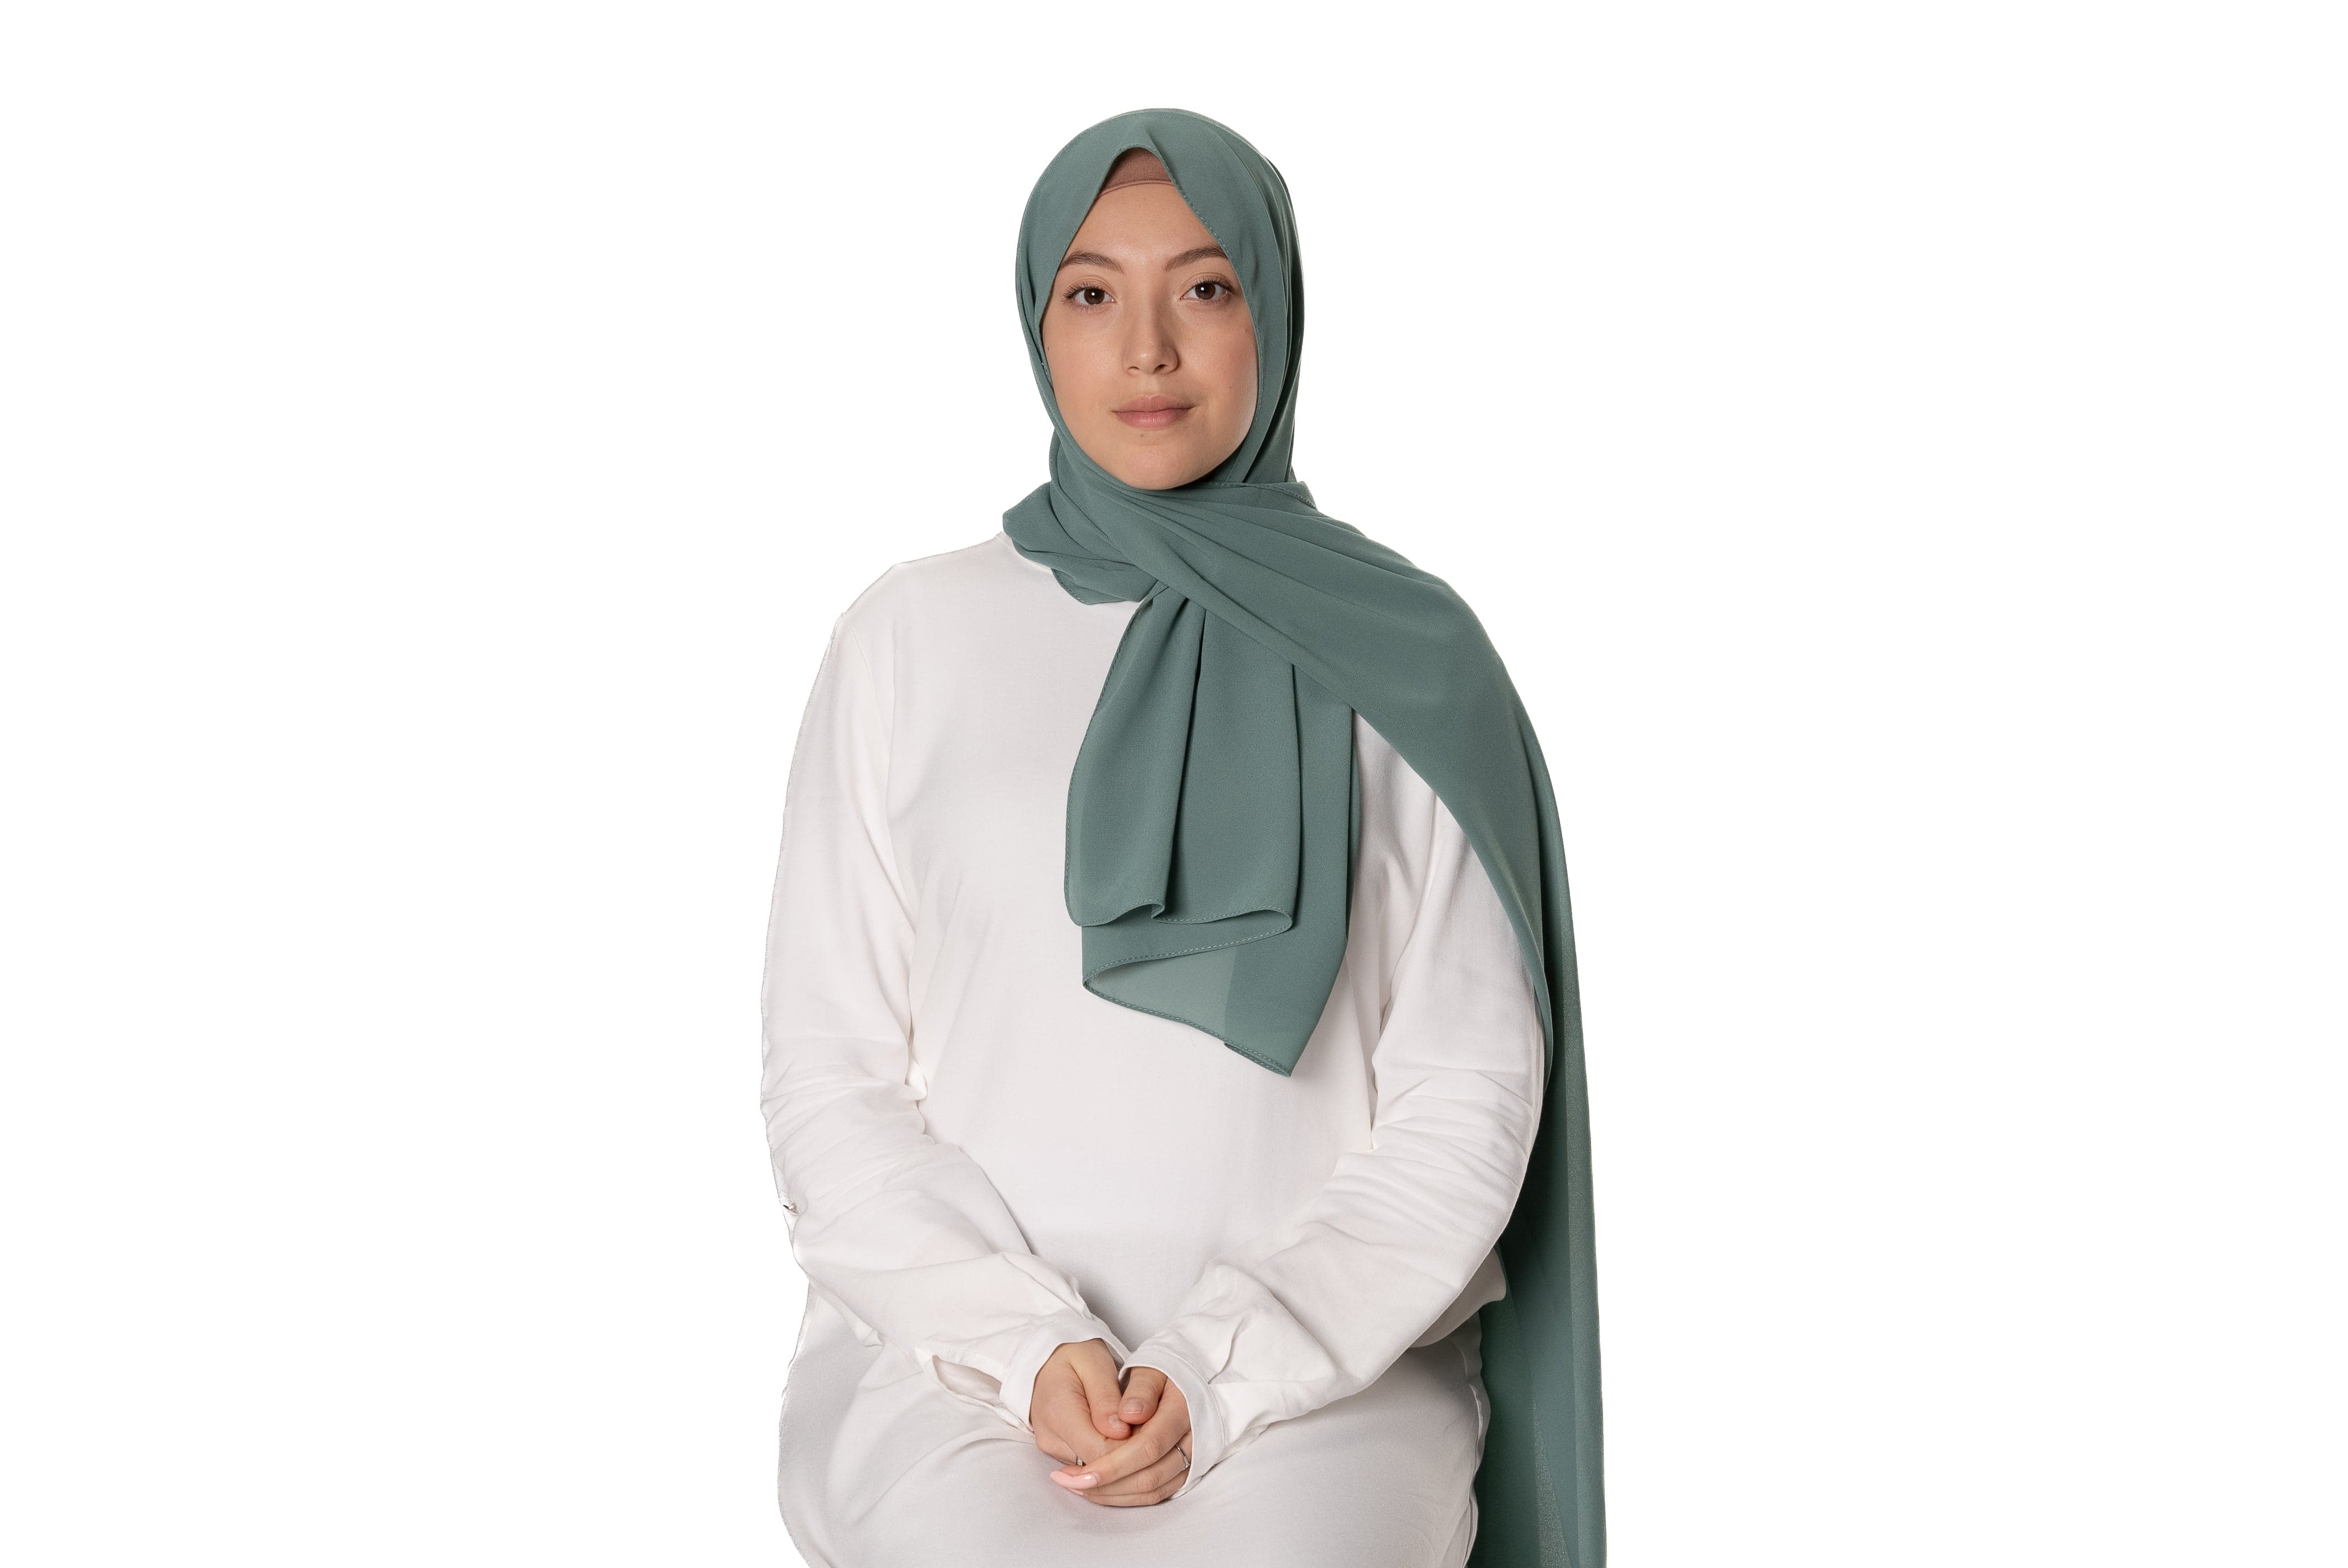 Non-Slip Premium Bubble Chiffon Hijab by Jolie Nisa. Its comfortable and secure fit.